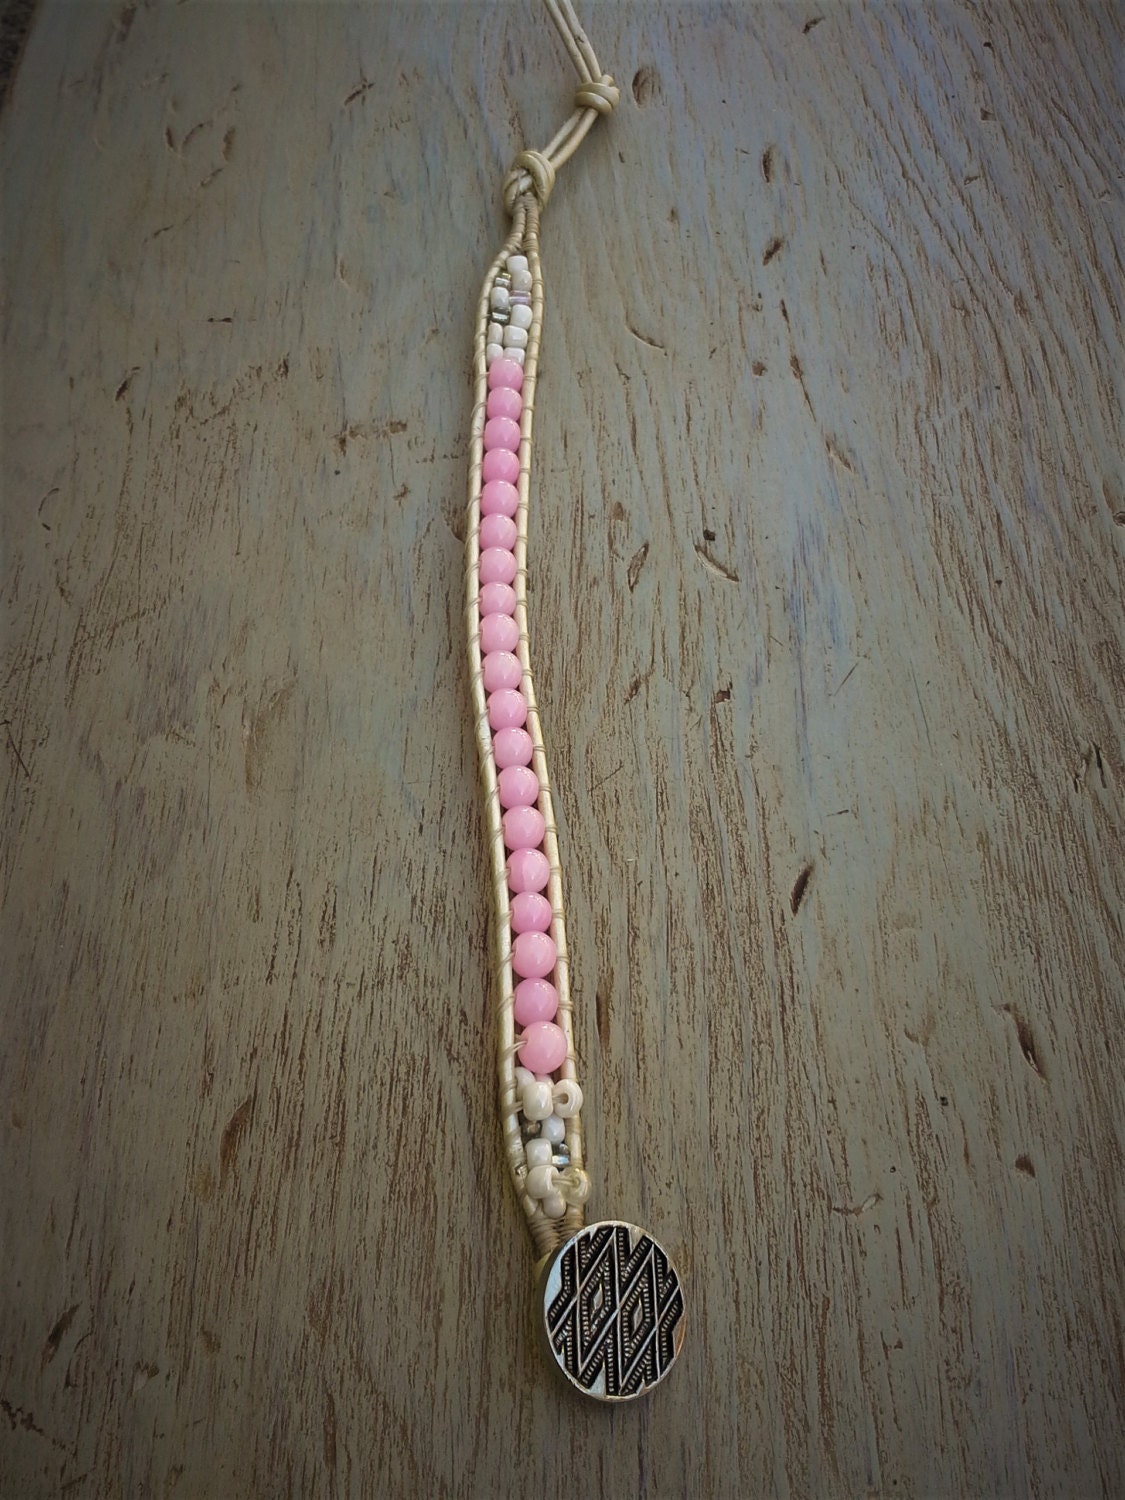 Single Wrap Pink Glass Beads With White Leather Cord Bracelet - Etsy